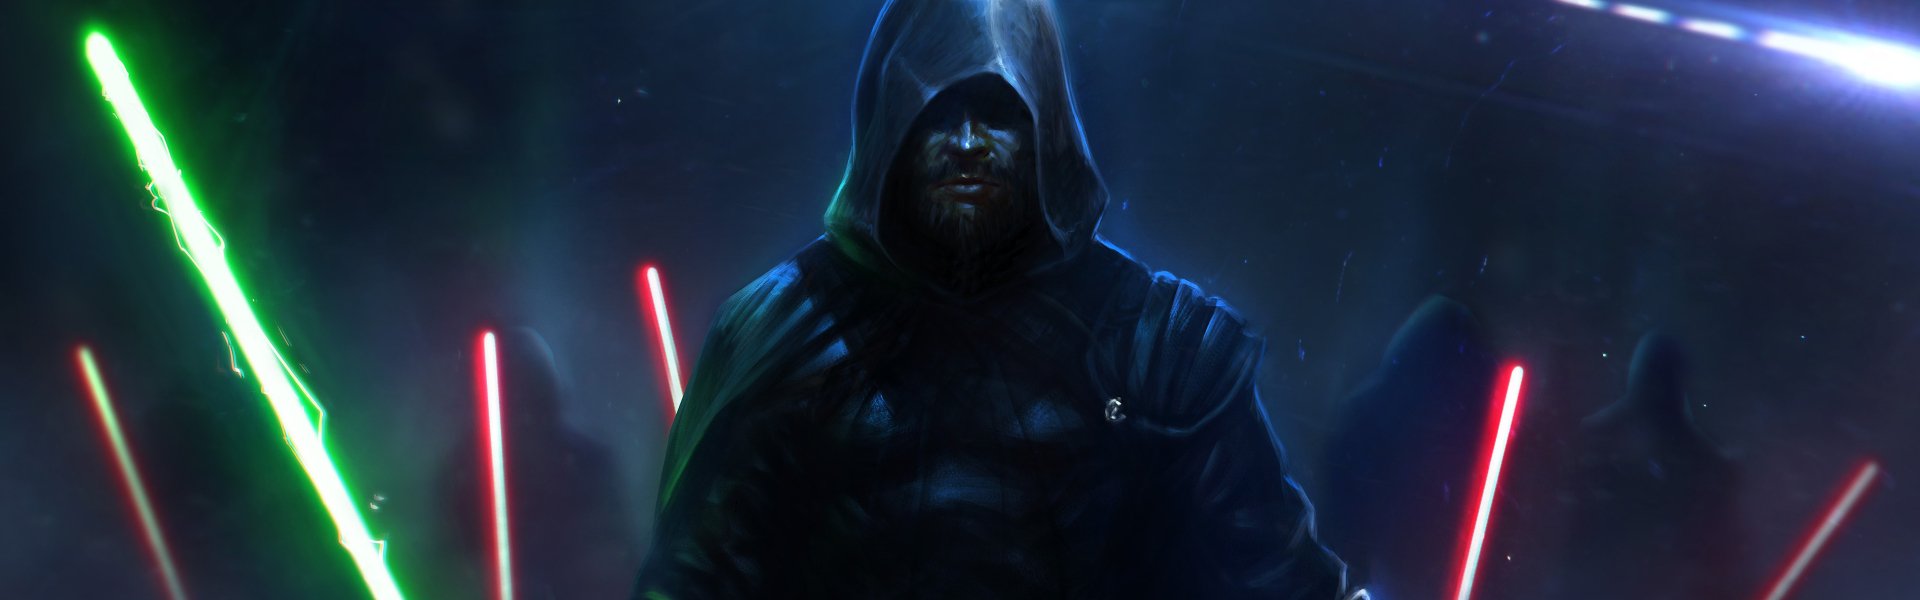 Siths HD Wallpaper | Background Image | 3840x1200 | ID ...